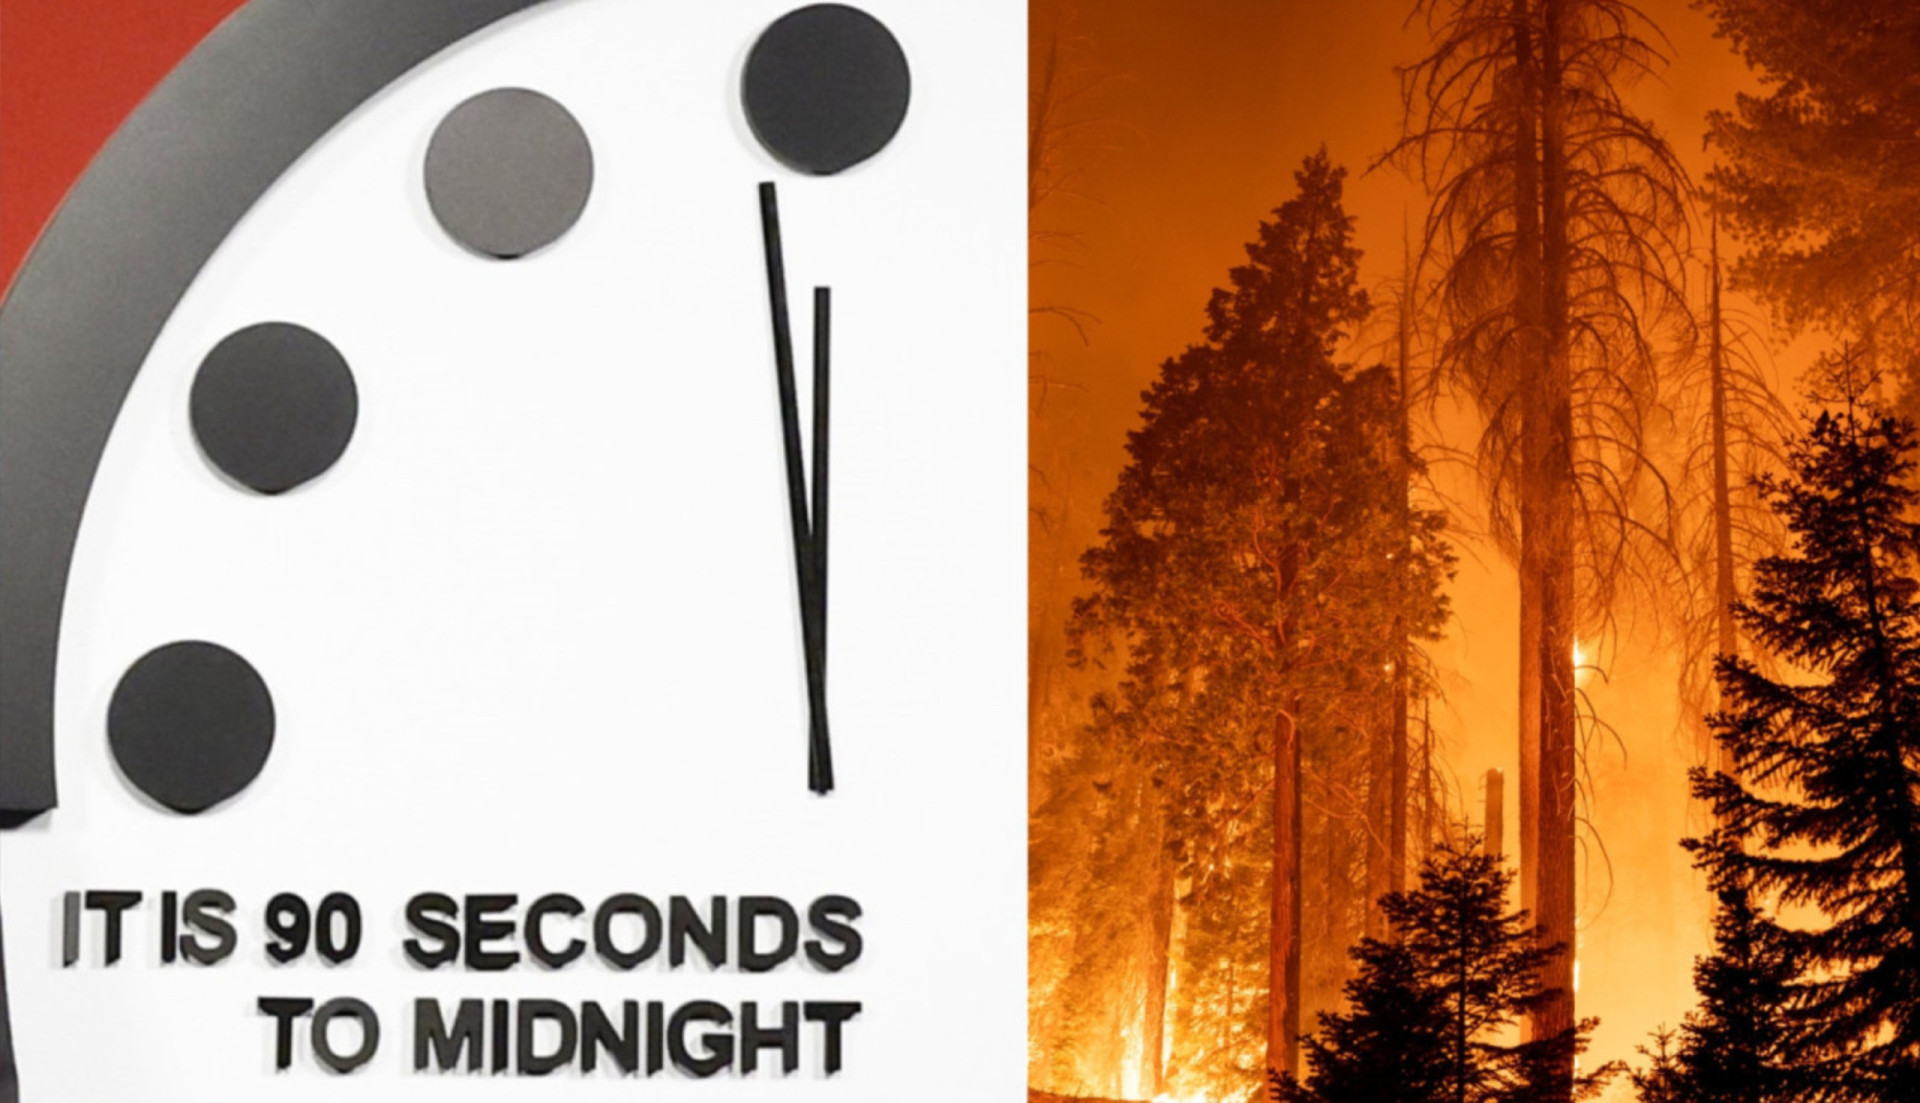 <p>The Doomsday Clock continues to inch closer to the apocalypse over climate change and fears of nuclear war. The year 2024 has brought yet another dire warning issued by the Bulletin of the Atomic Scientists. But what is the Doomsday Clock, and how is it read?</p> <p>To summarize, the clock was developed by scientists in 1947 to track the likelihood of mankind doing something that brings about the end of the world. The development of nuclear weapons and the rapid progression of climate change are two things that have moved the clock's hand closer to midnight, which in this case, marks Armageddon. After the end of the Cold War, the clock was 17 minutes away from midnight, but in recent years, we've gone from counting down the minutes to counting down the seconds. In 2024, the Bulletin left the clock at the same position as last year—90 seconds to midnight.</p> <p>"Conflict hot spots around the world carry the threat of nuclear escalation, climate change is already causing death and destruction, and disruptive technologies like AI and biological research advance faster than their safeguards," Rachel Bronson, the Bulletin's president and CEO, told Reuters. She clarified that leaving the clock unchanged is "not an indication that the world is stable," considering how disastrously close we already are to midnight. </p> <p>Click through the gallery to learn more about the Doomsday Clock and how we've come so close to the end of the world. </p><p>You may also like:<a href="https://www.starsinsider.com/n/187642?utm_source=msn.com&utm_medium=display&utm_campaign=referral_description&utm_content=490923v3en-us"> The craziest daredevils to go over the Niagara Falls</a></p>